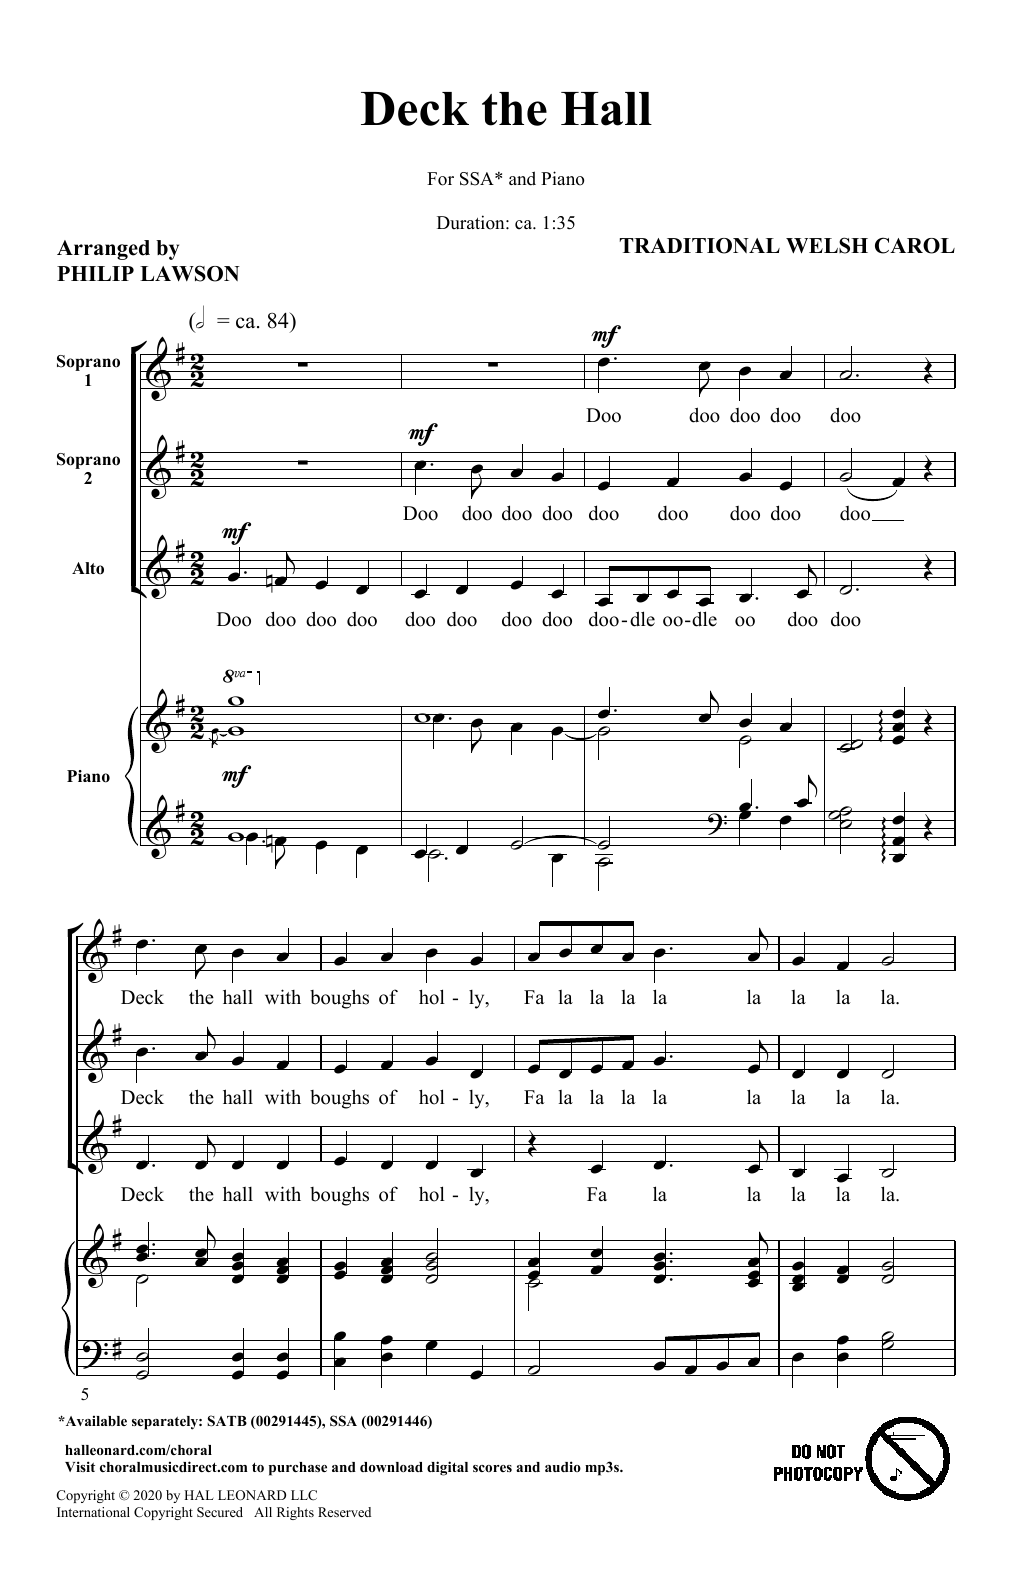 Download Traditional Welsh Carol Deck The Hall (arr. Philip Lawson) Sheet Music